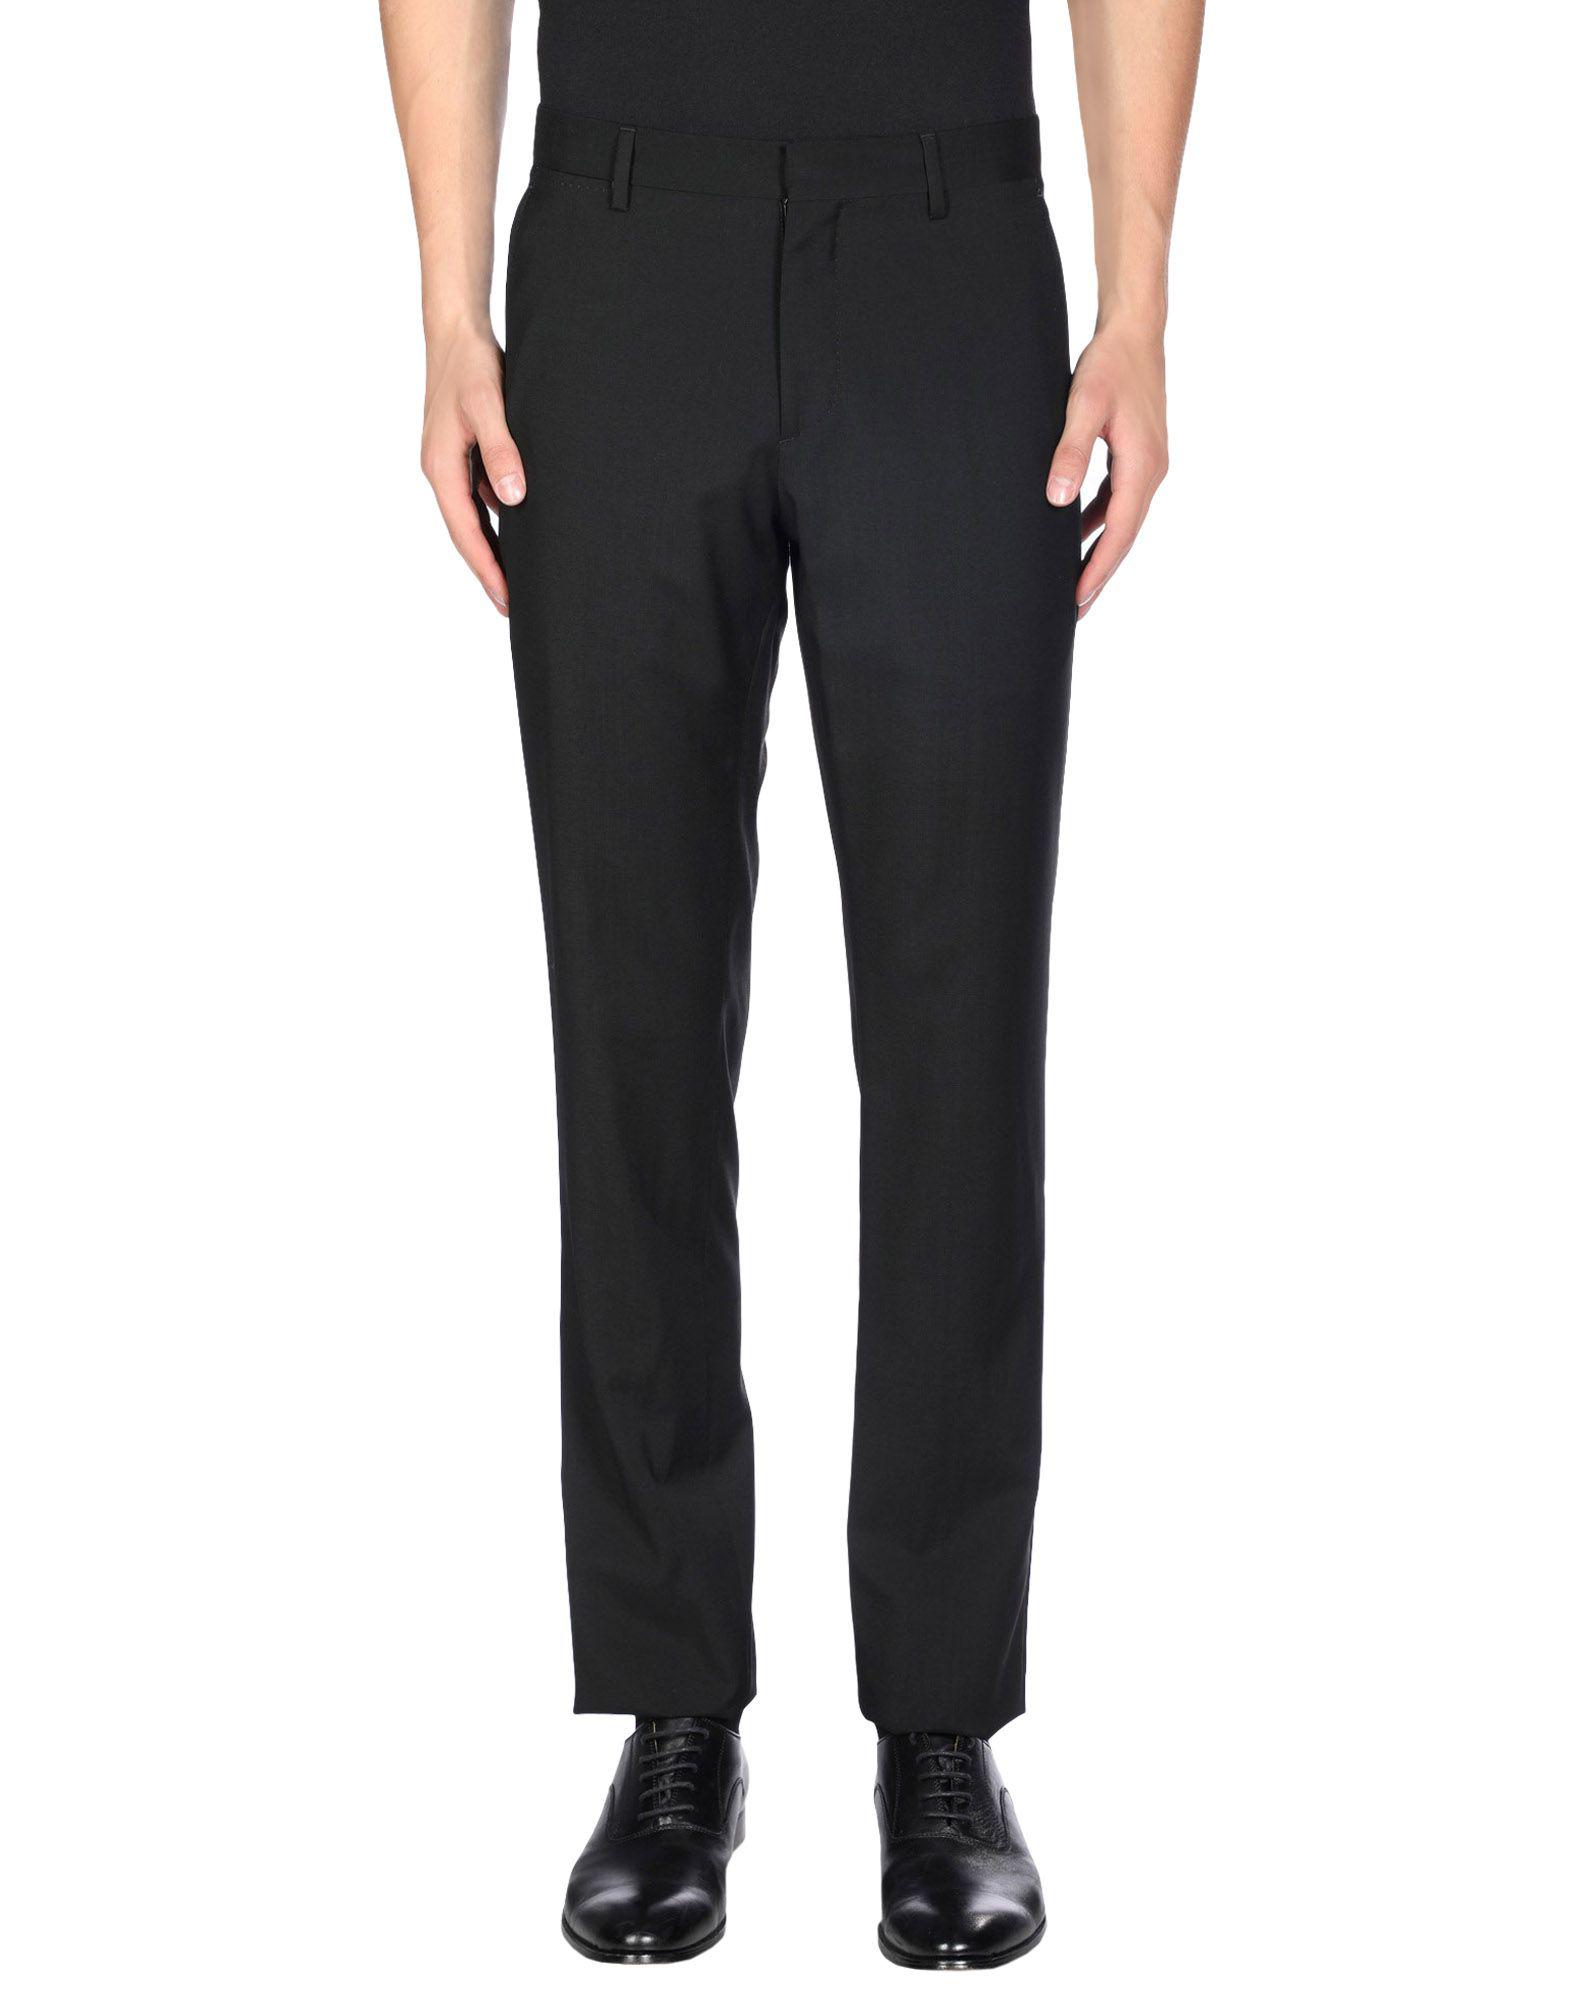 Burberry Wool Casual Pants in Black for Men - Lyst